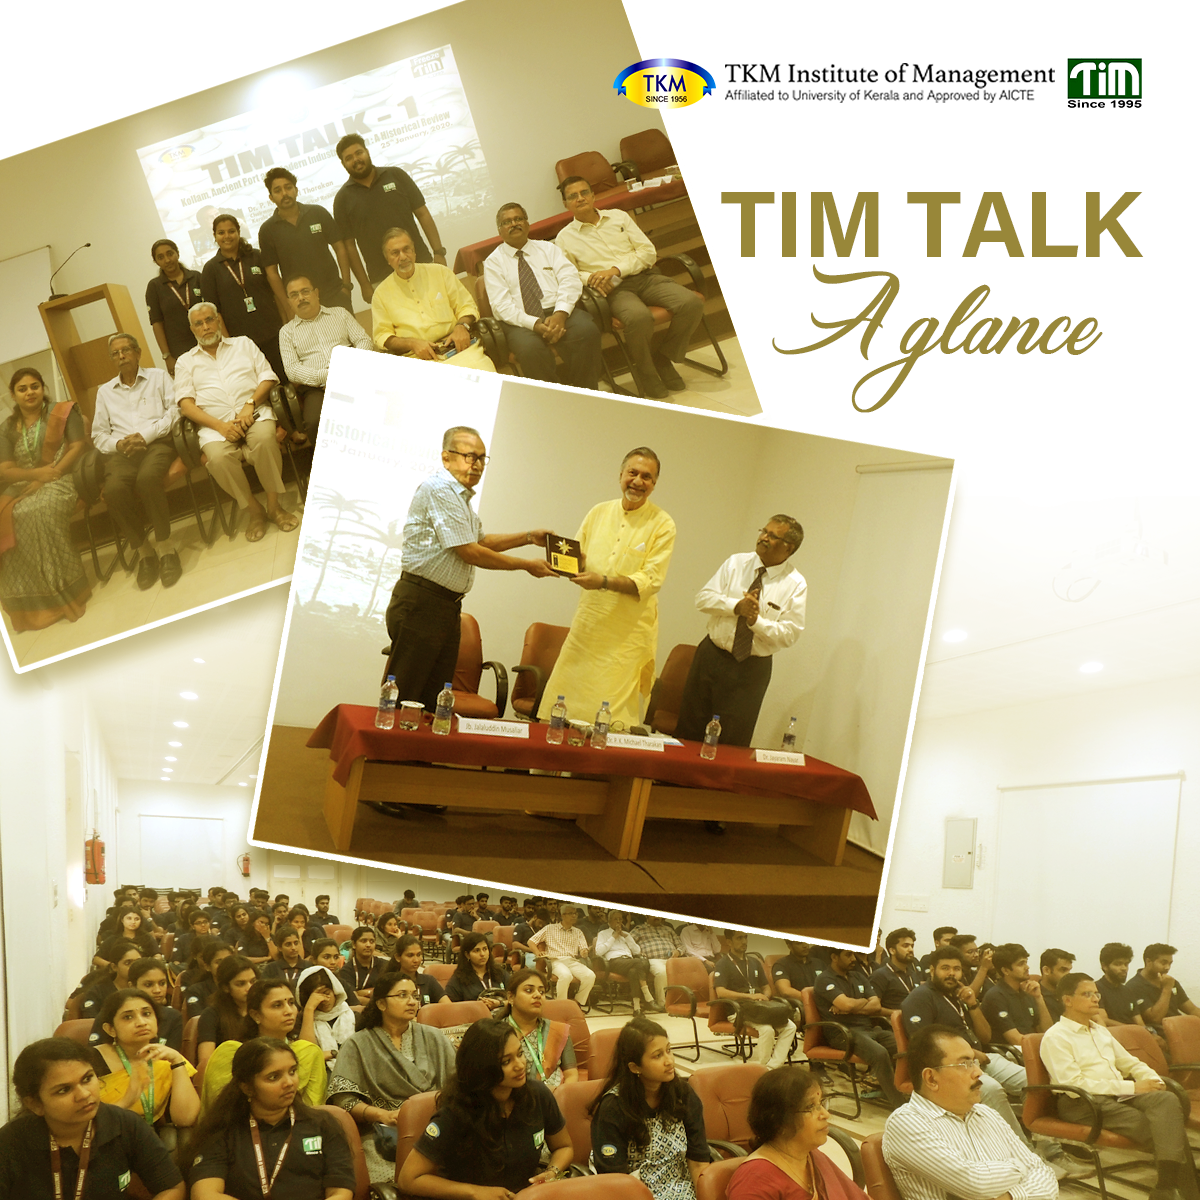 A Few Memorable Moments From TIM Talk Session